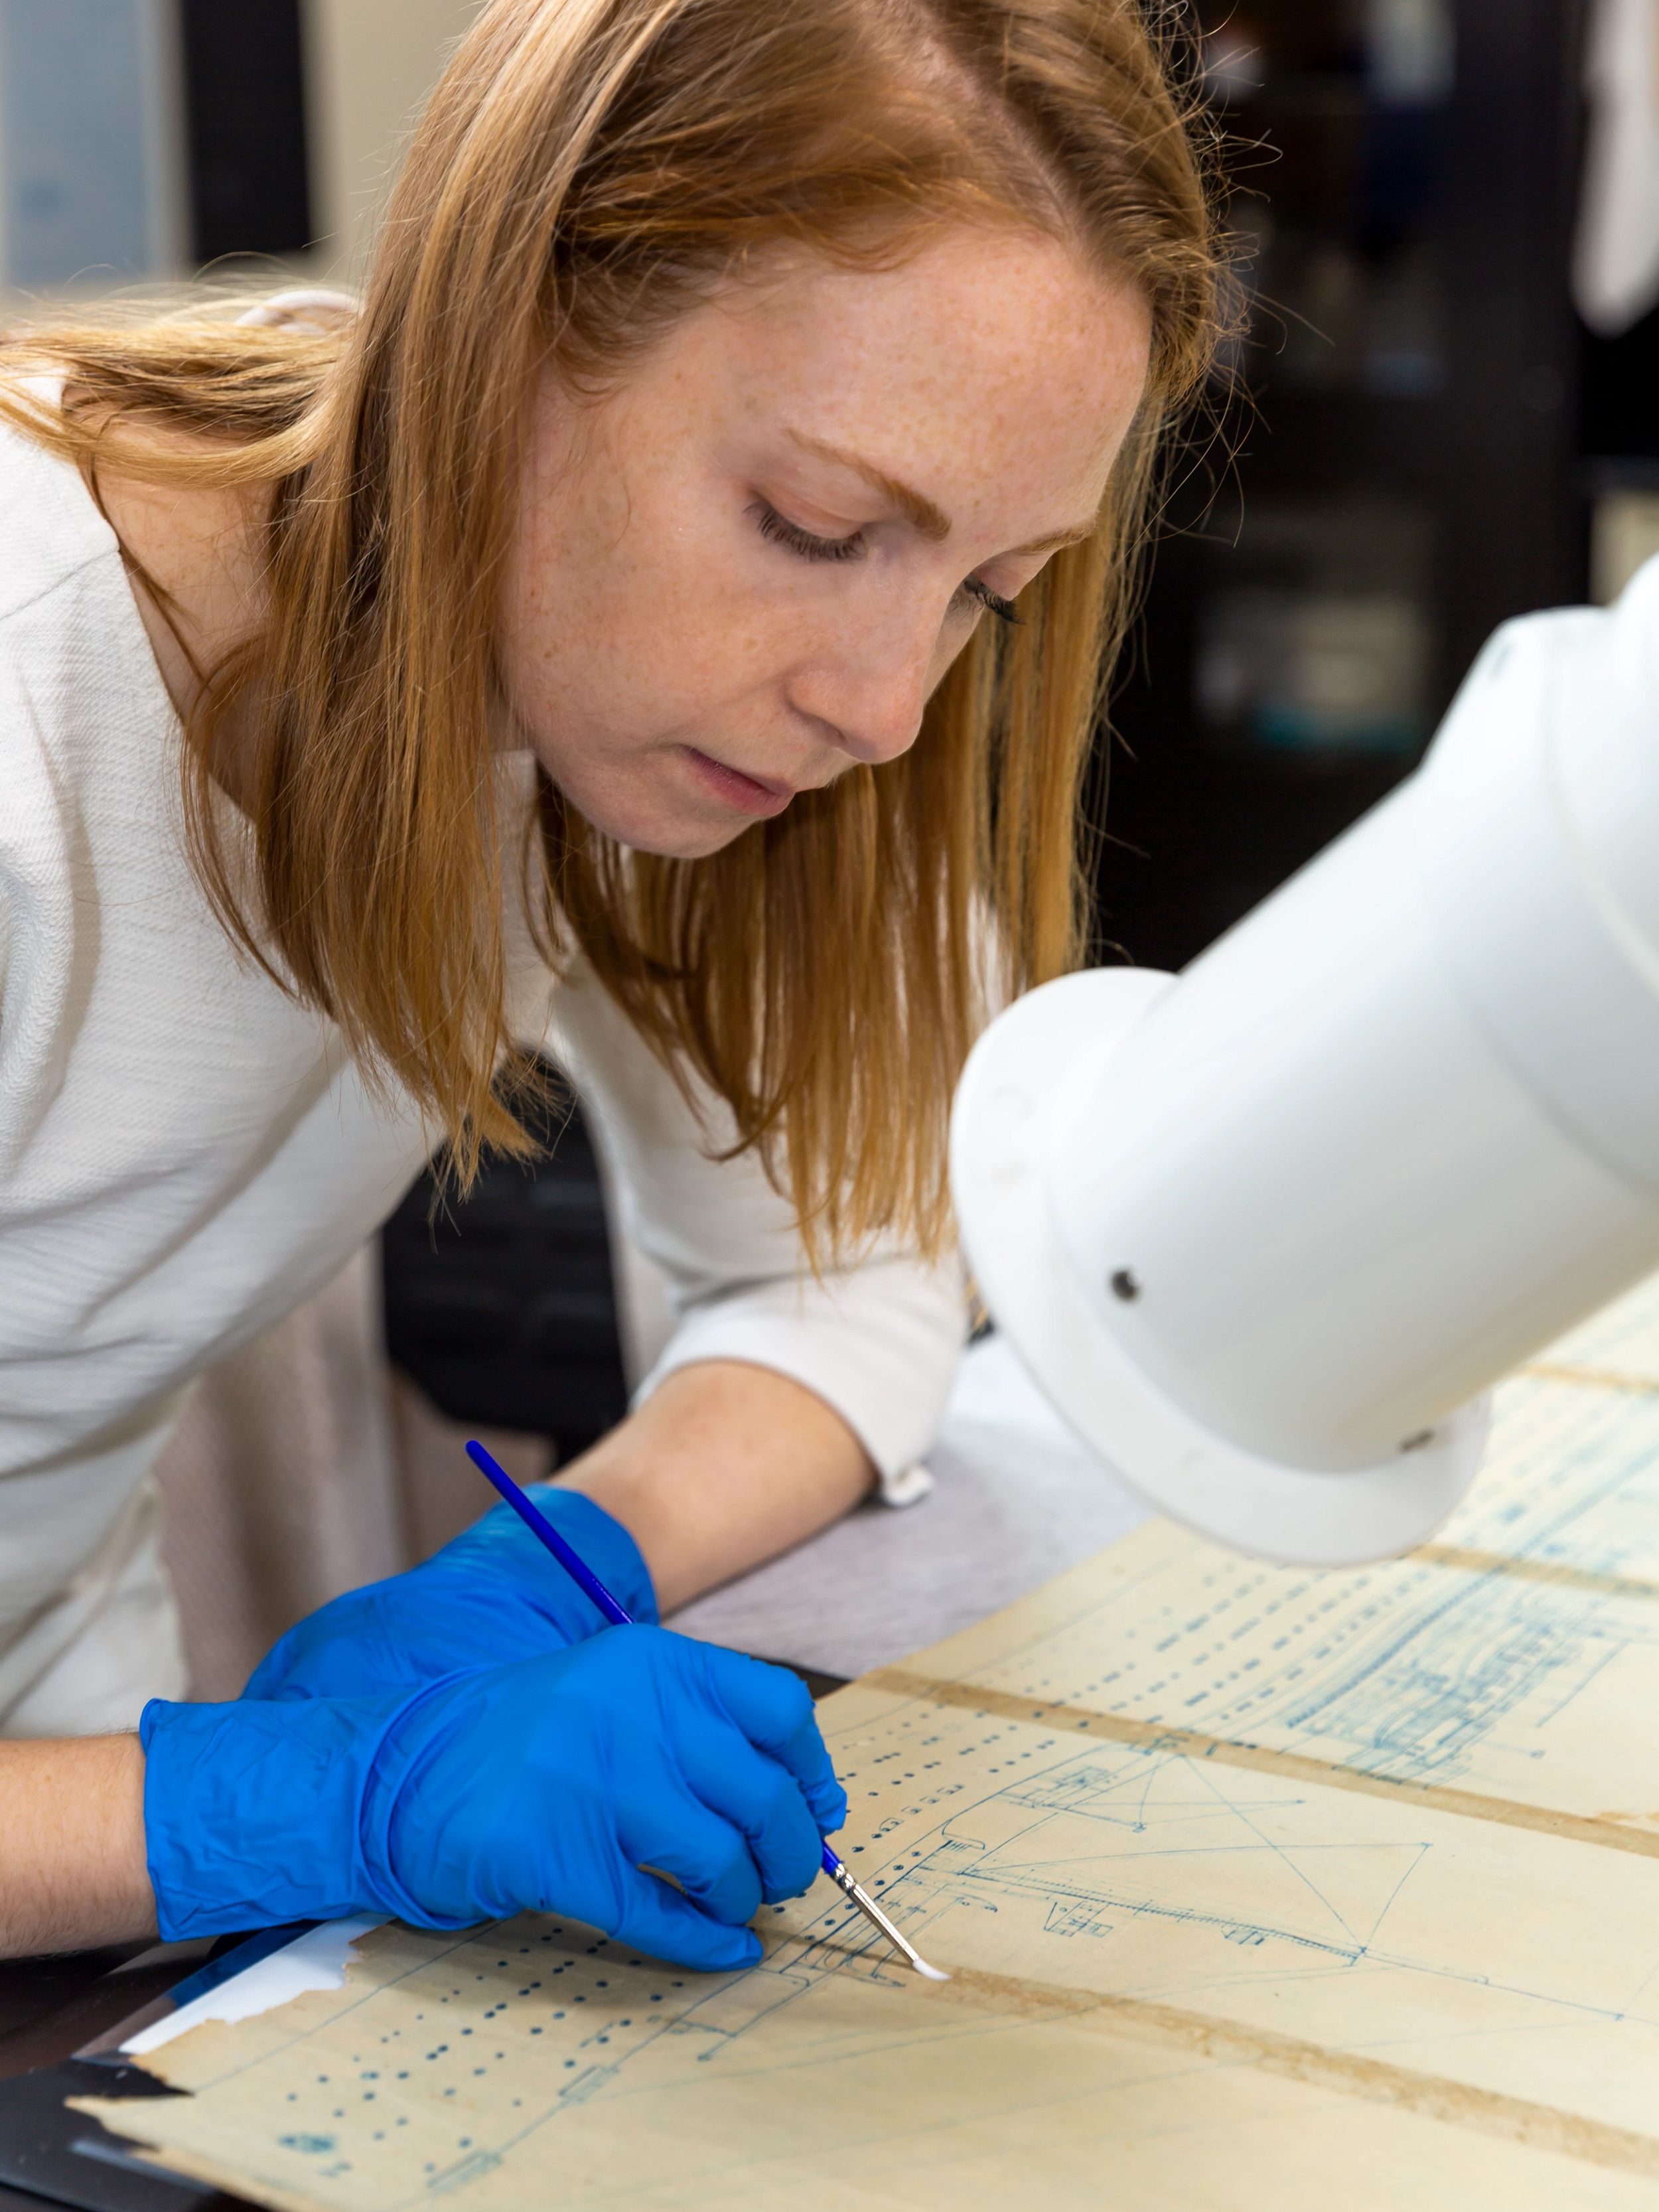 Paper Conservator Emilie Duncan applying conservation treatment to an artifact.